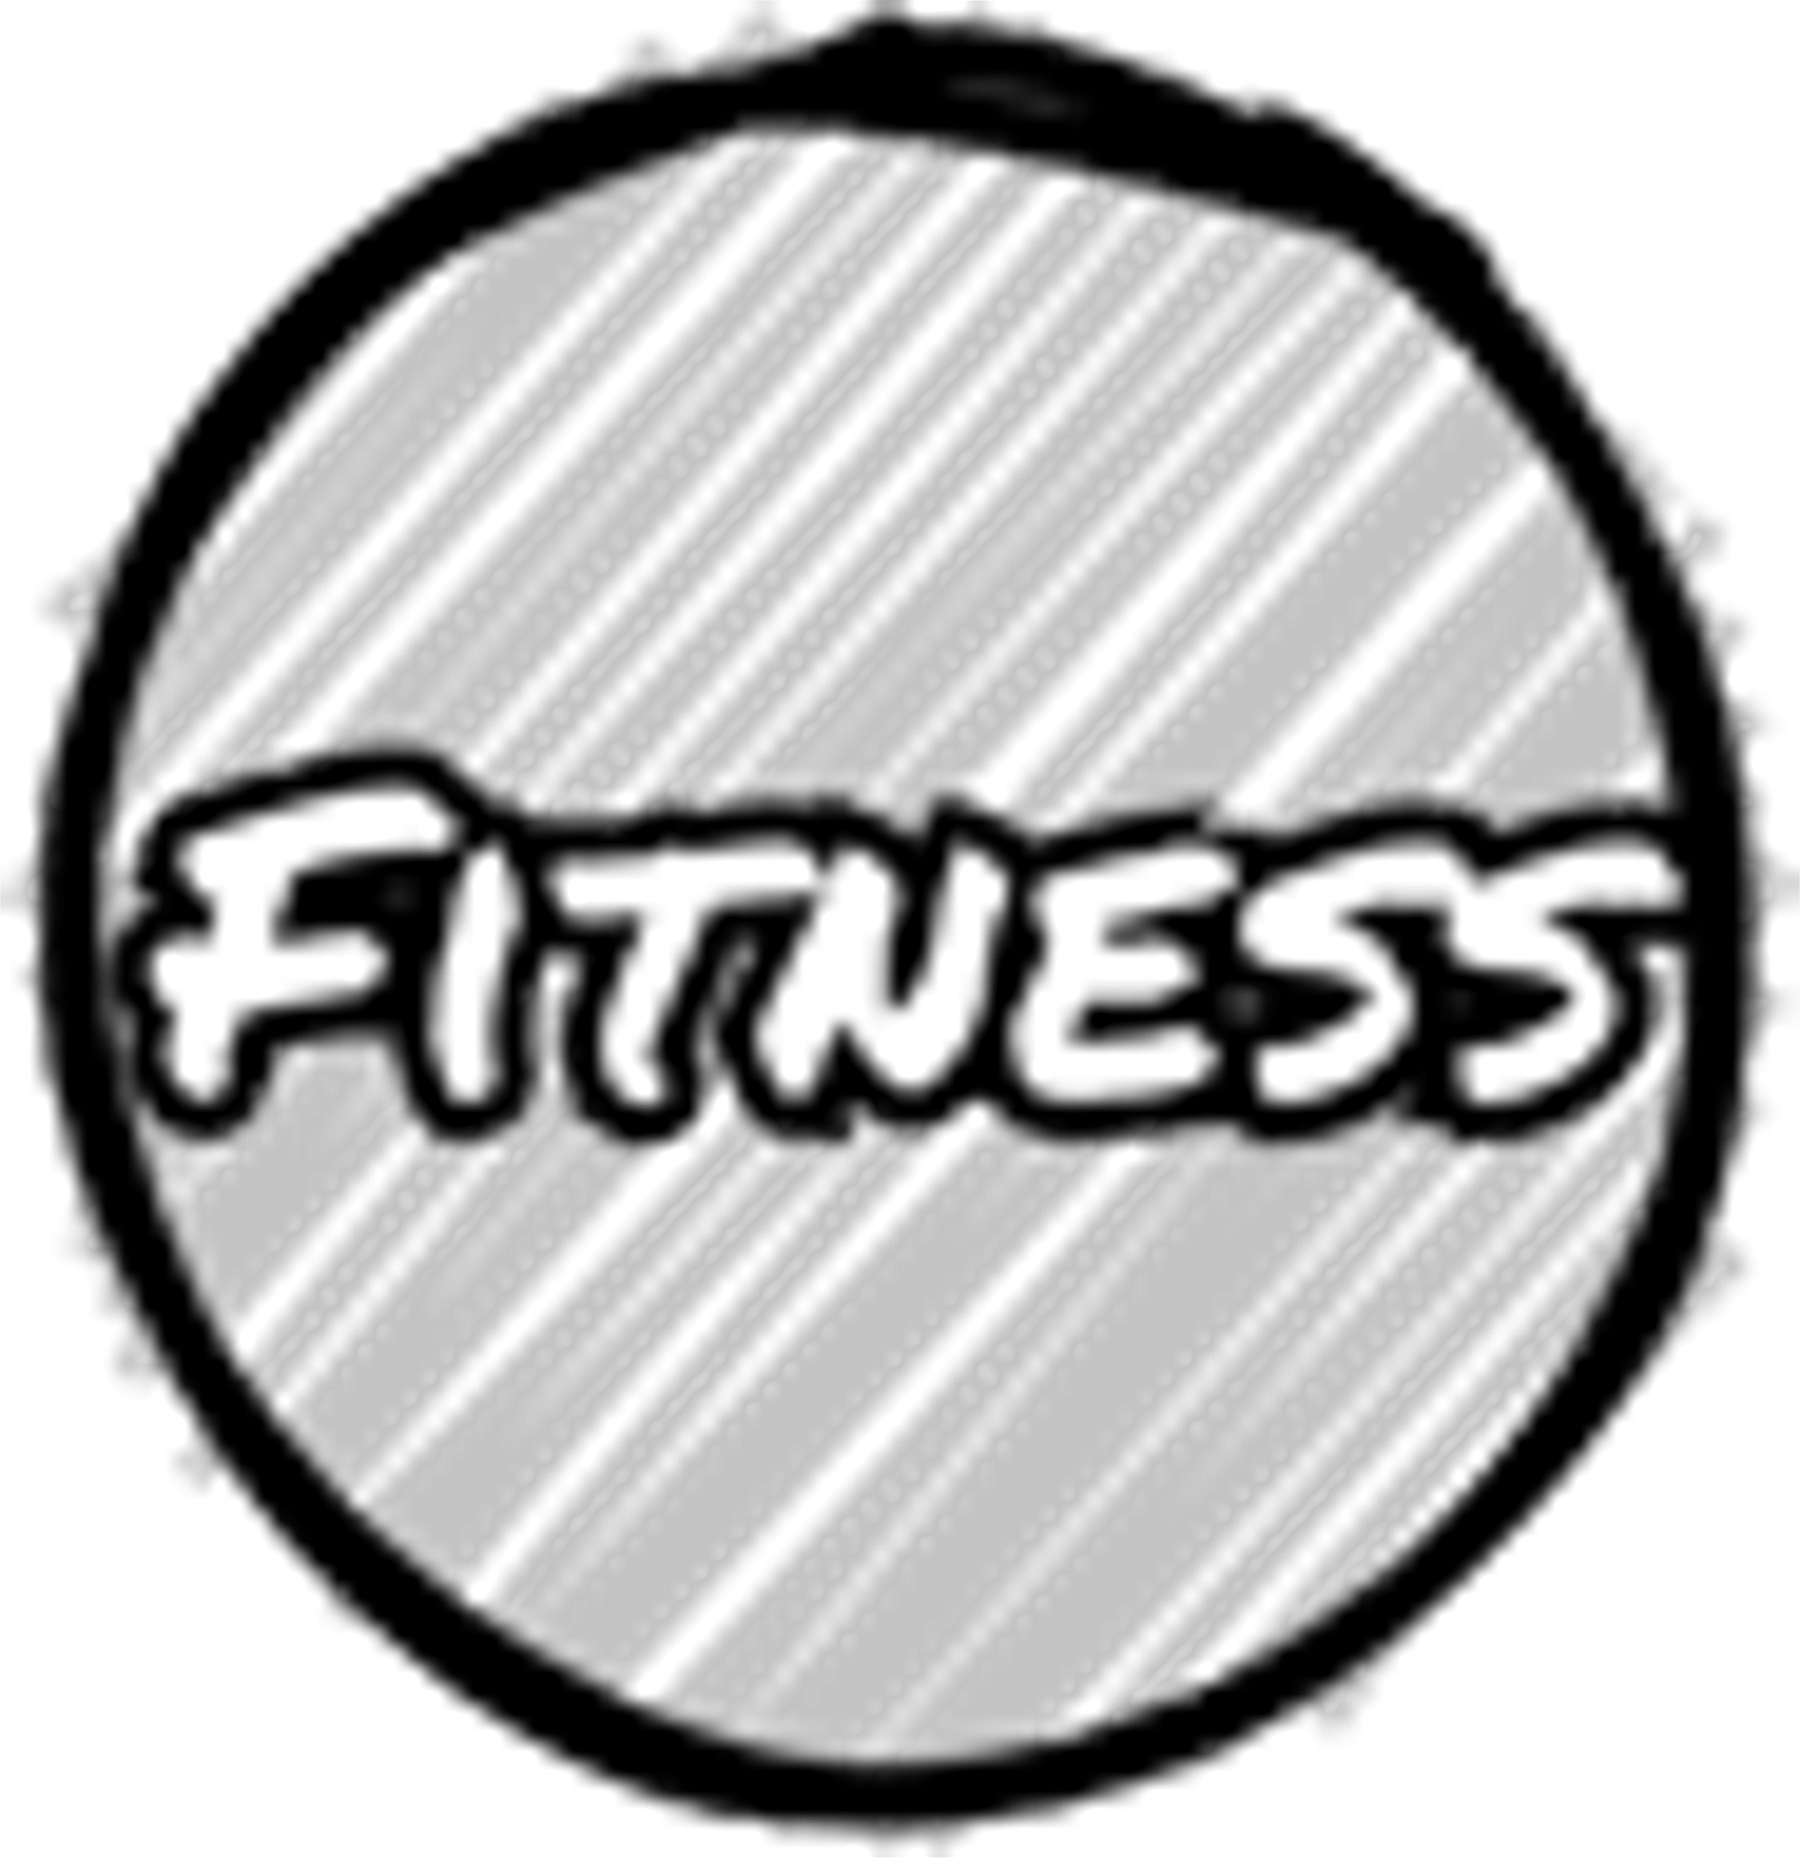 Fitness Blog from AnyEvery.org